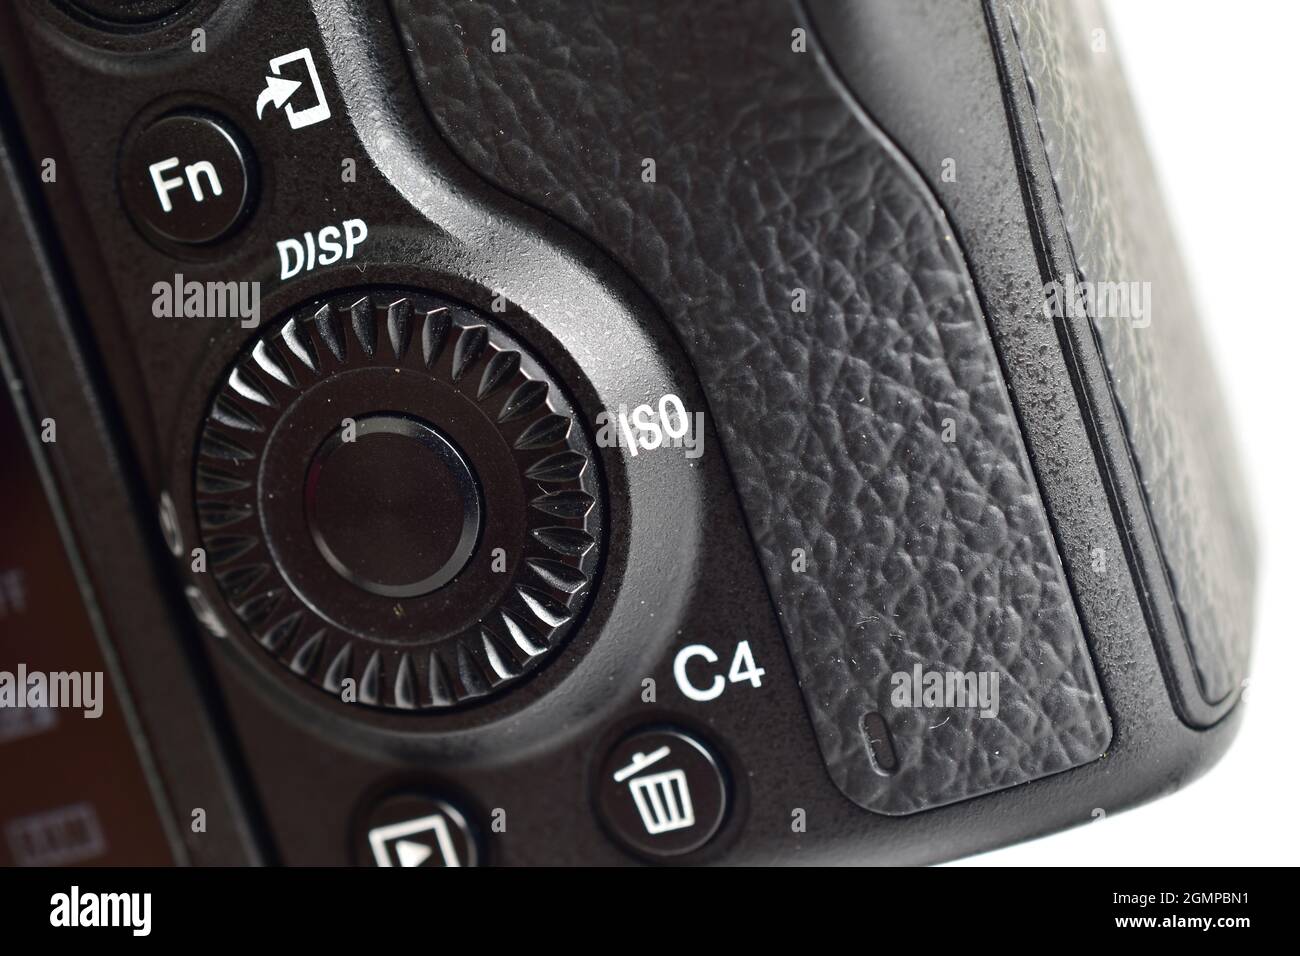 Rotating dial and Fn Button on Camera Stock Photo